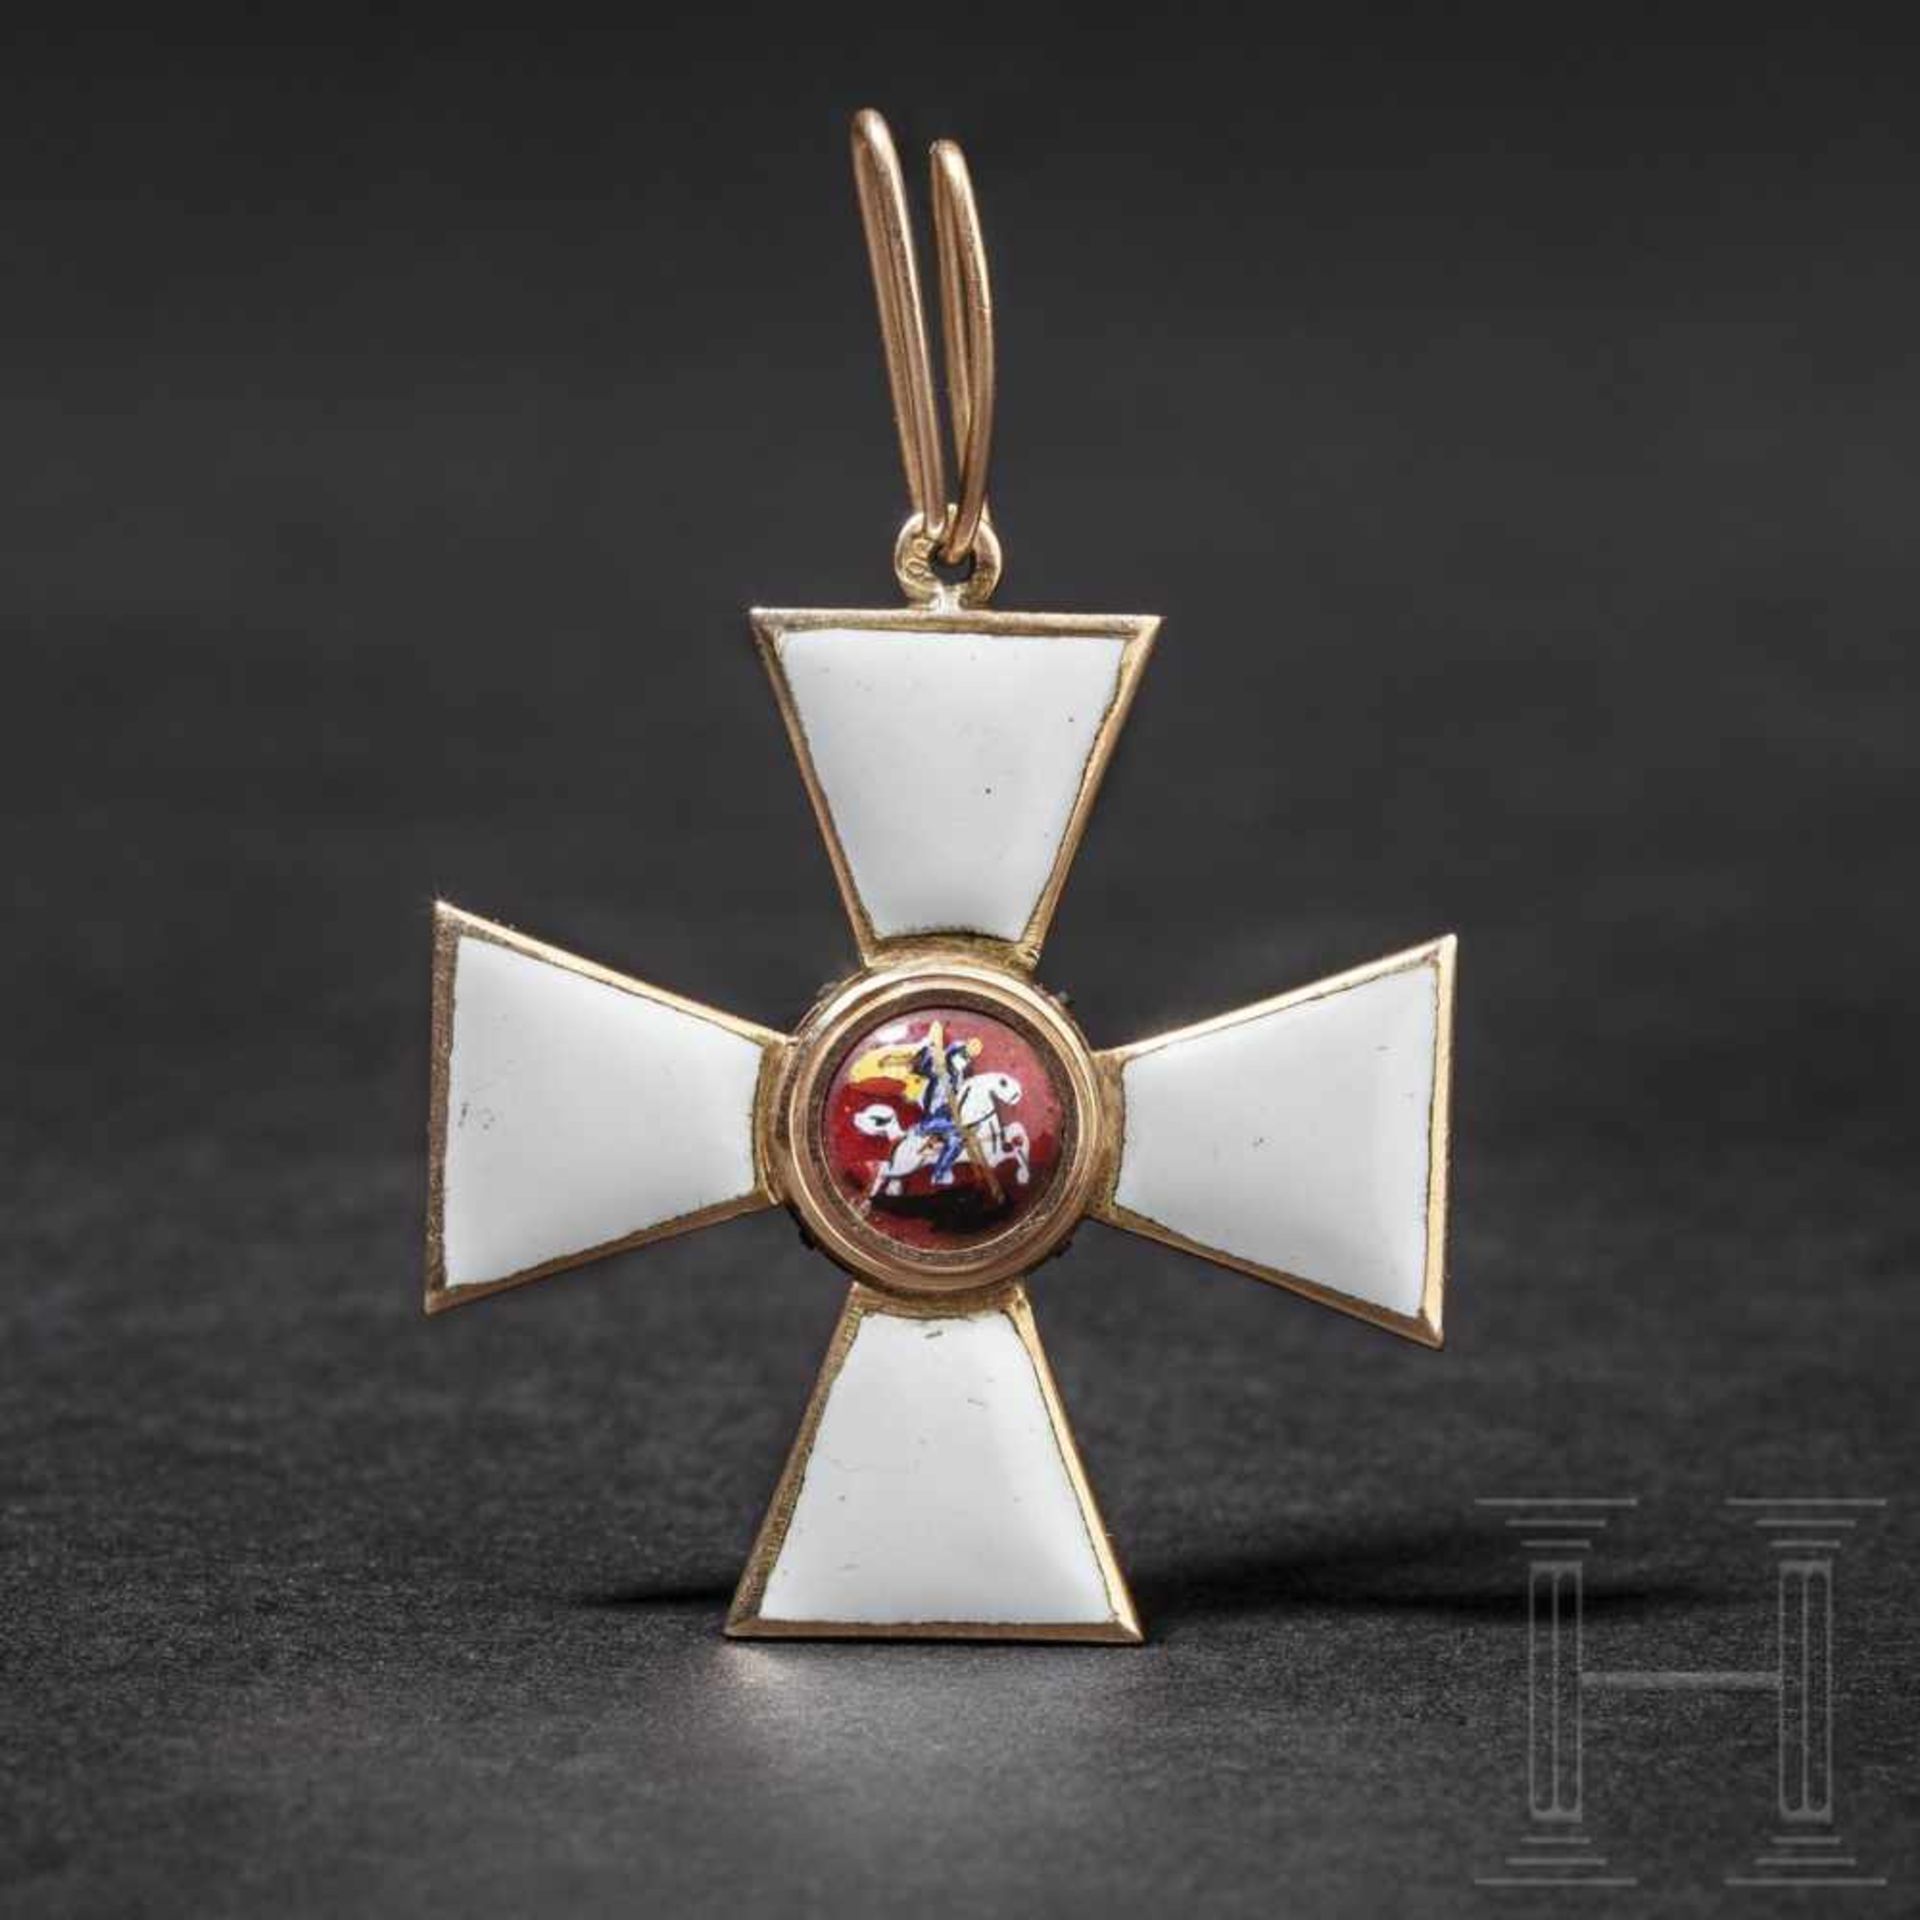 A Russian Order of St. George – a cross 4th class, circa 1915Gold, enamelled. The mark of fineness